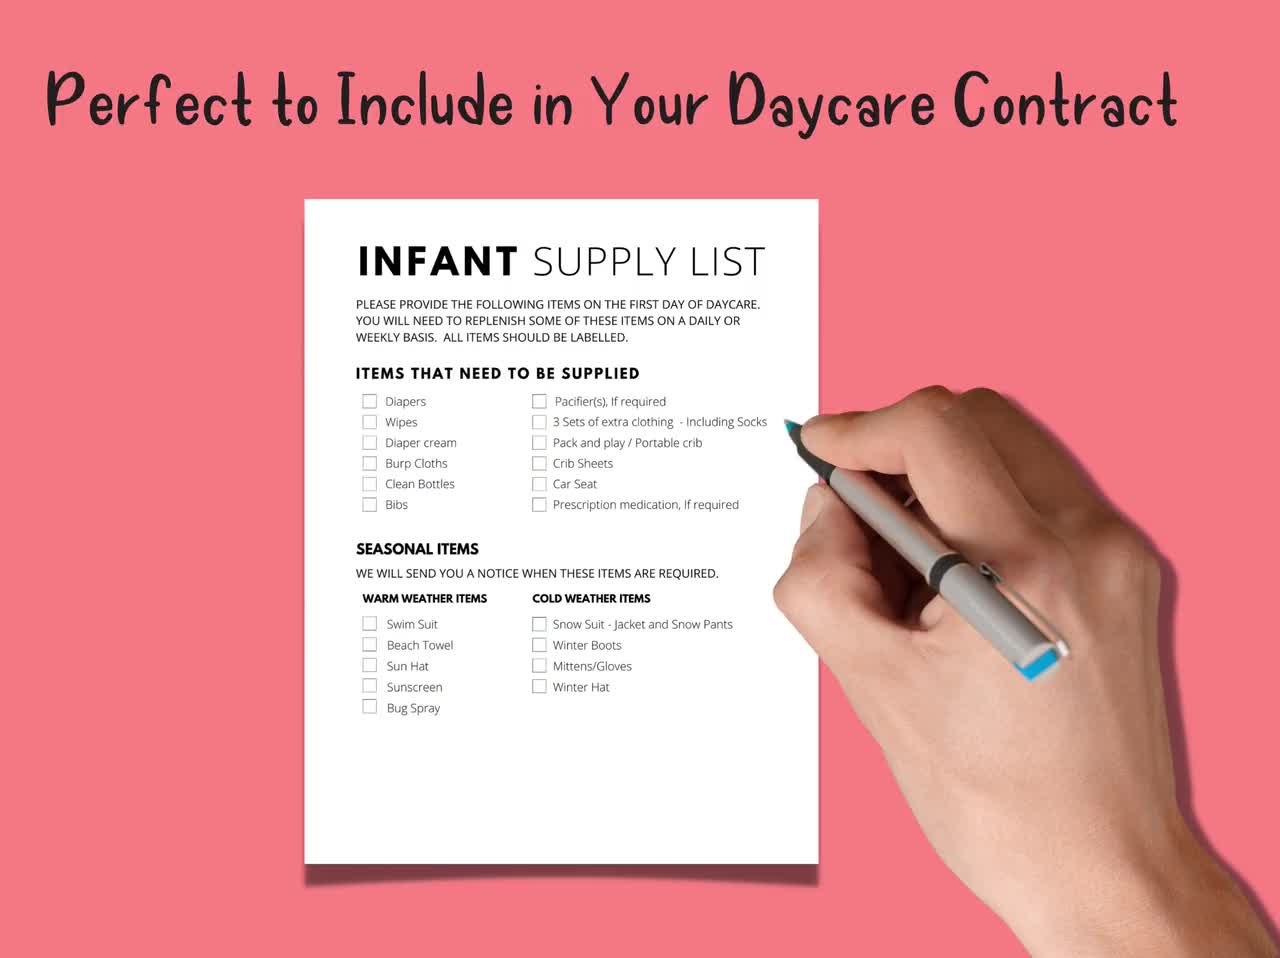 A Weekly Daycare Packing List for Babies